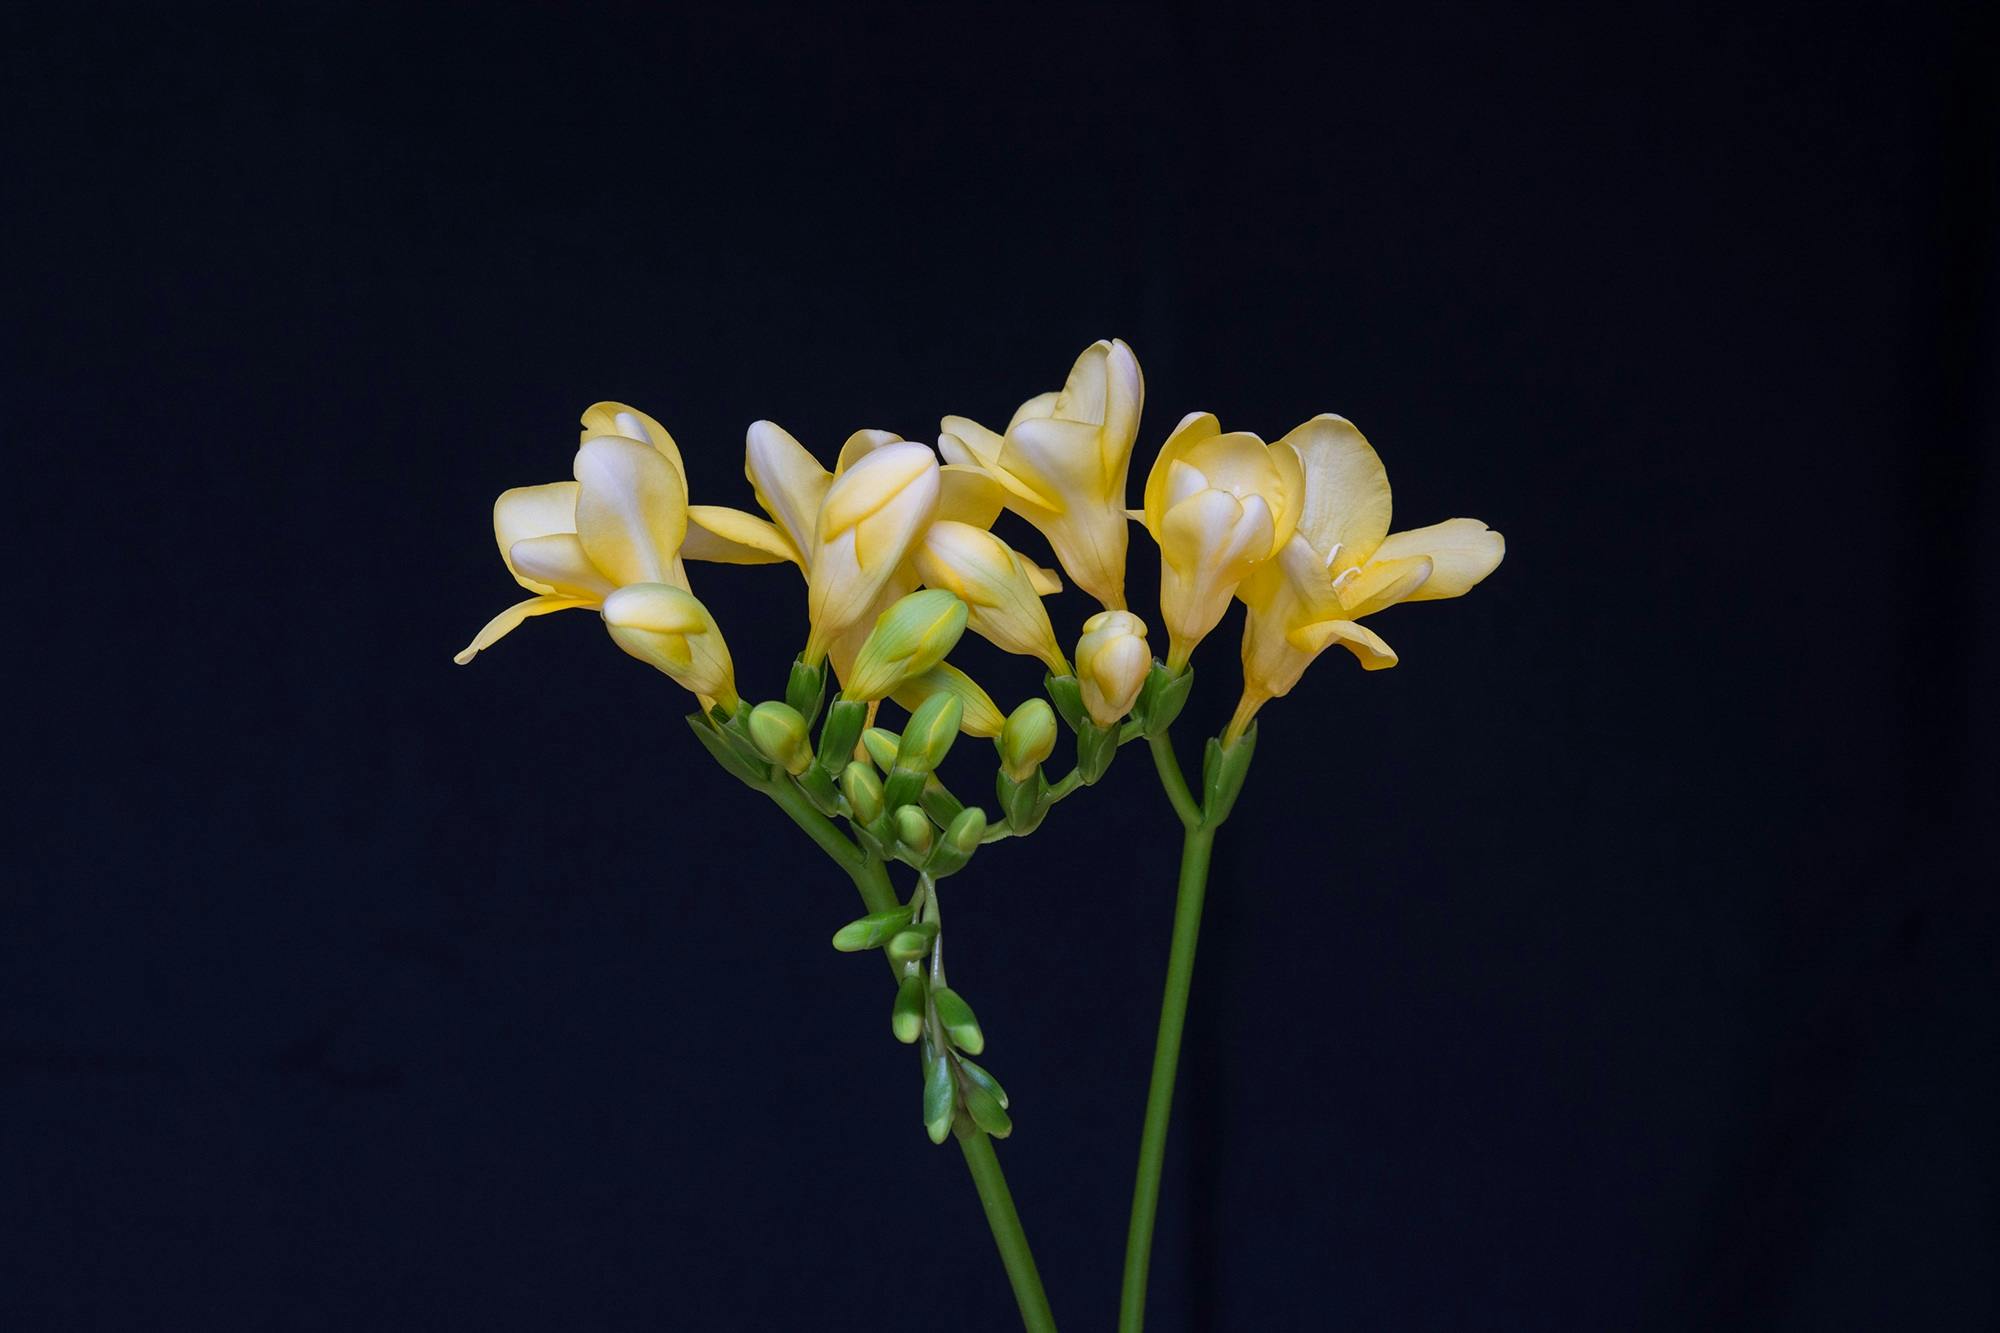 yellow flowers against a black background, a macro photograph, inspired by Robert Mapplethorpe, photorealism, high forehead, 35 mm product photo”, african sybil, shot on sony alpha dslr-a300